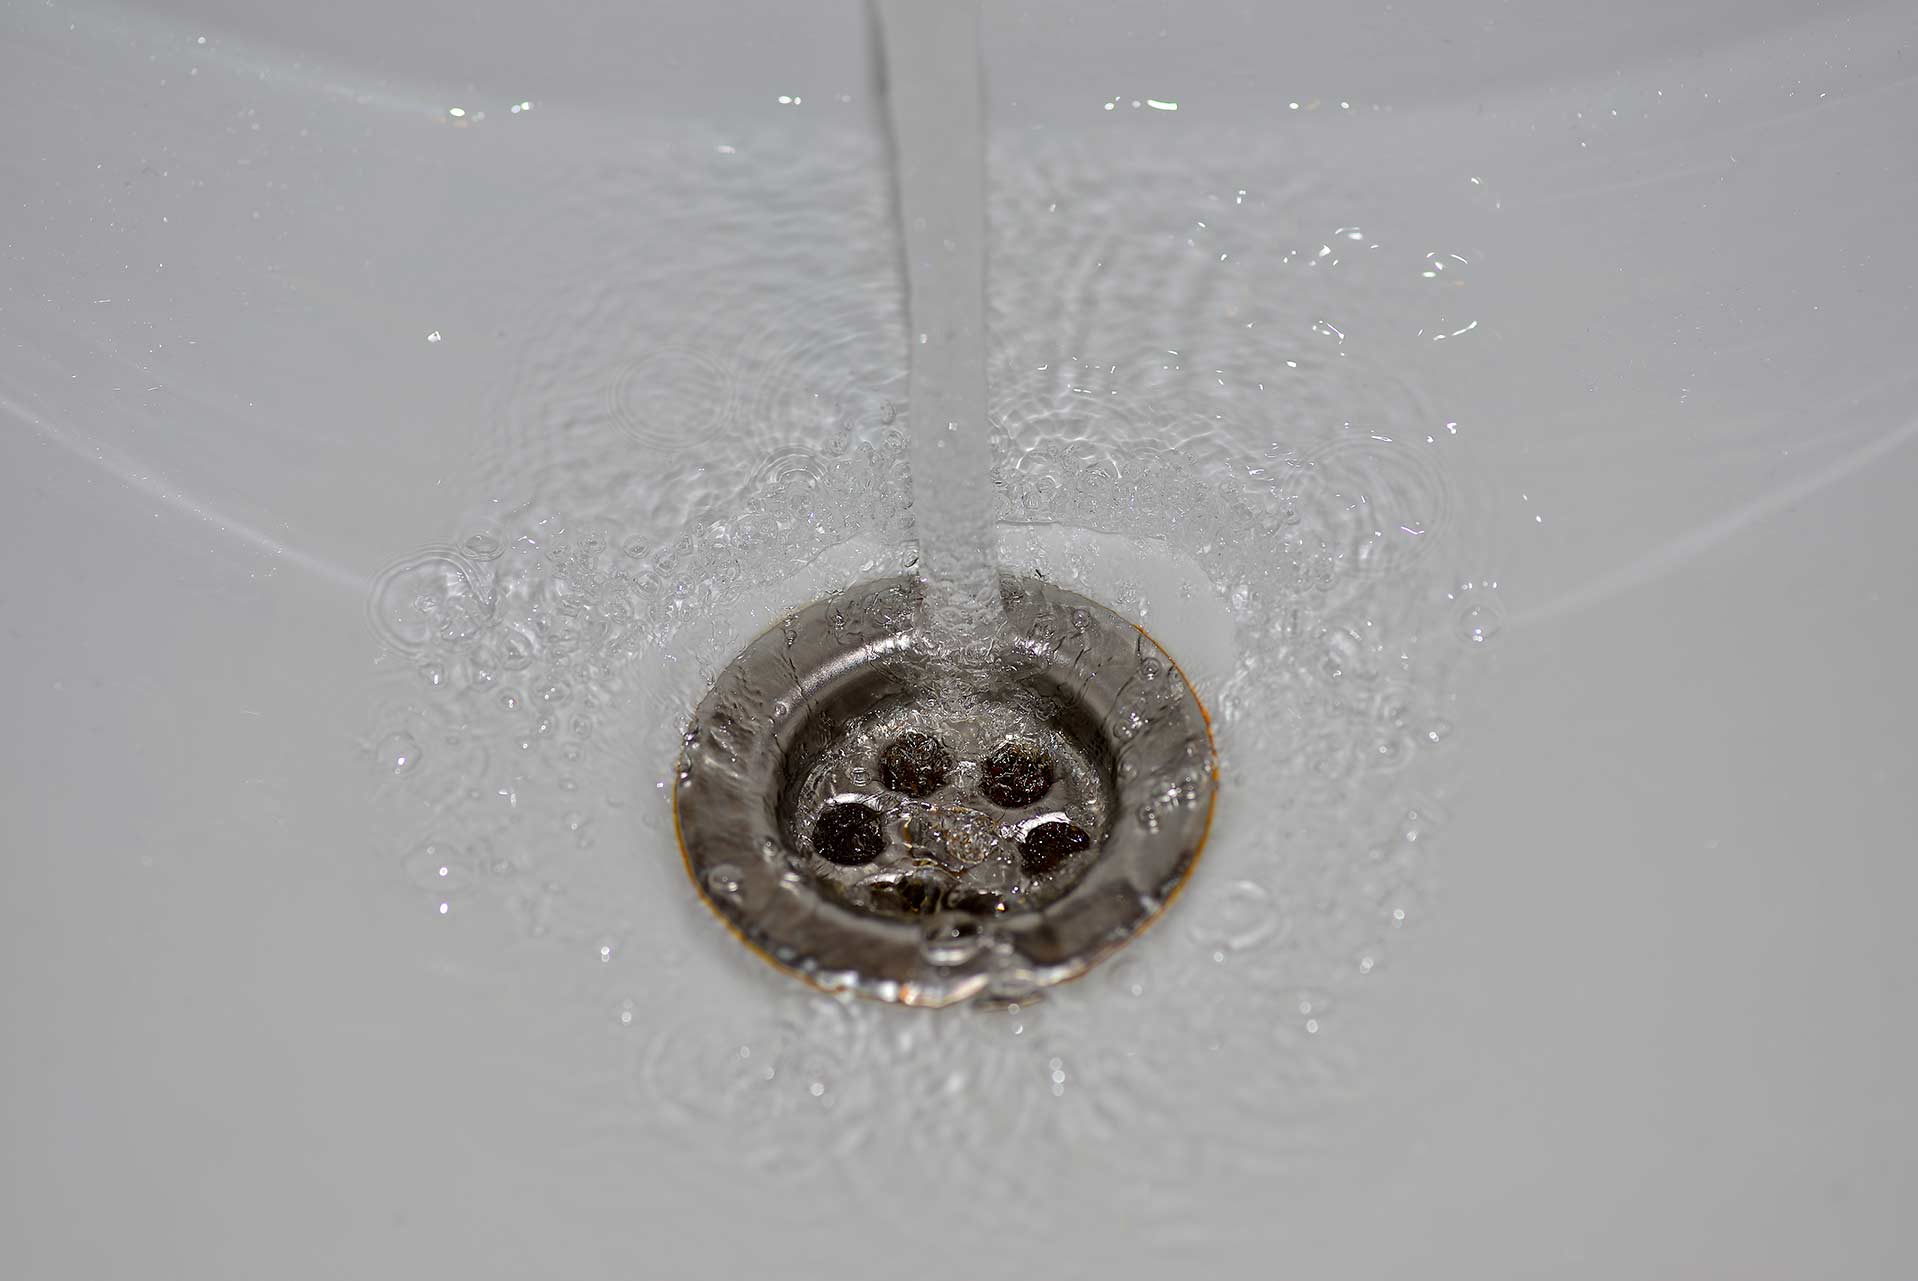 A2B Drains provides services to unblock blocked sinks and drains for properties in Queensbury.